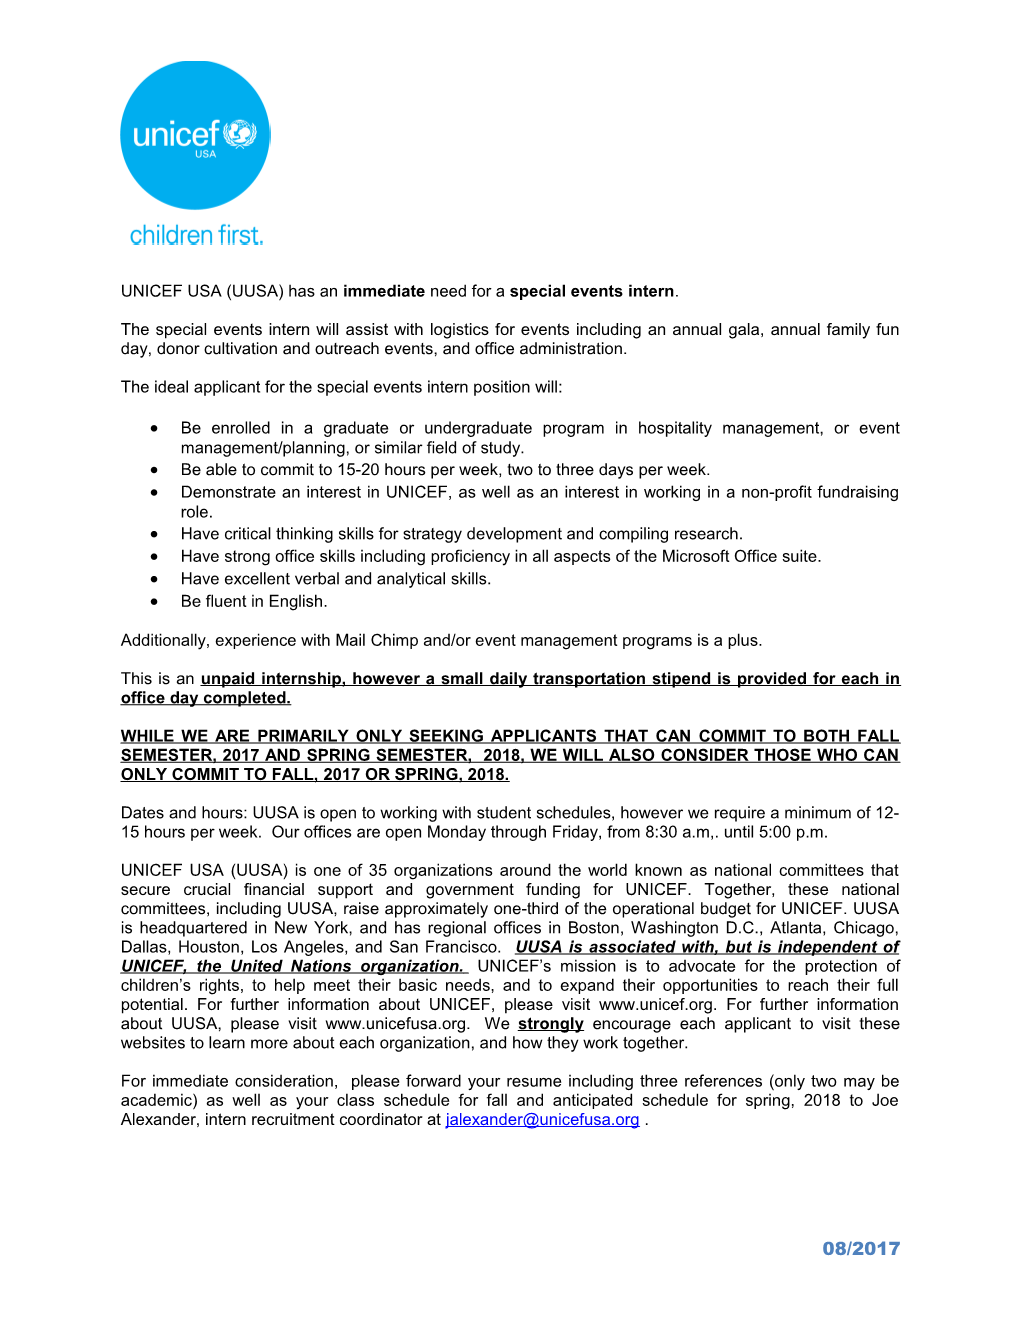 UNICEF USA (UUSA) Has an Immediate Need for a Special Events Intern